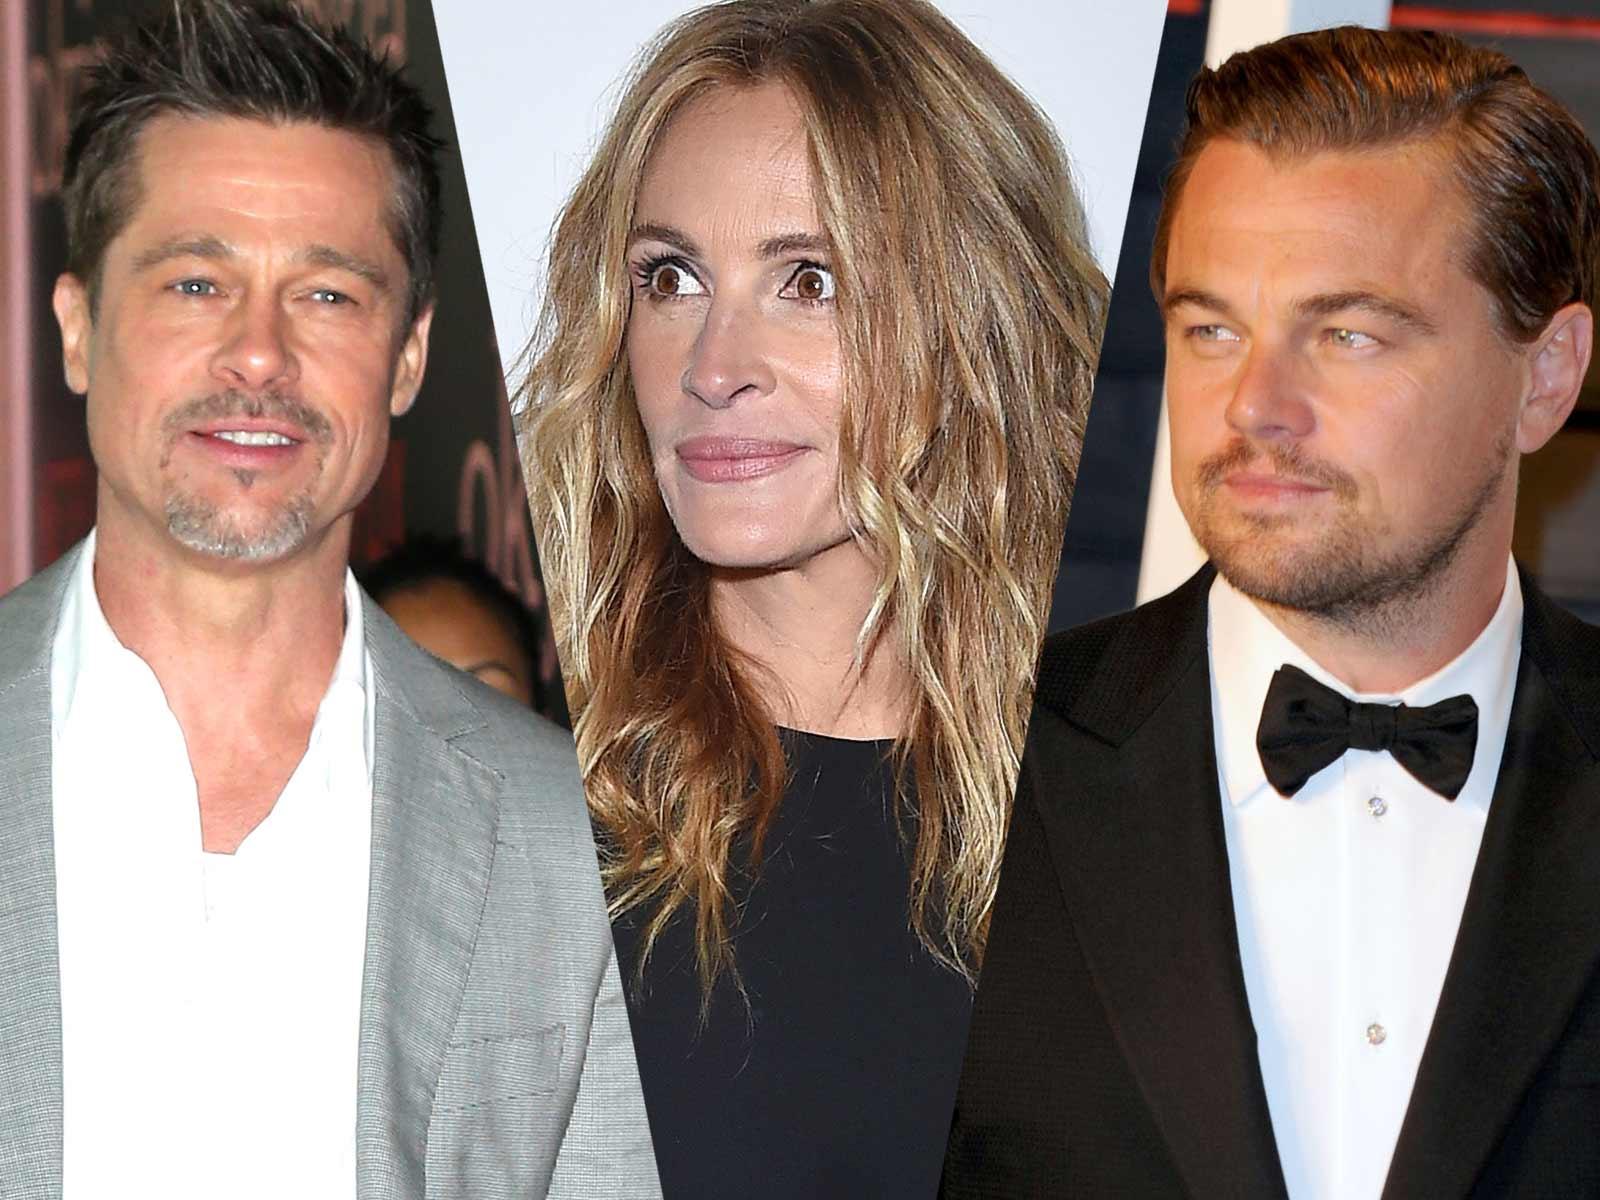 Brad Pitt, Julia Roberts, Leo DiCaprio and Other A-Listers Fight for Their Money Before the Sale of The Weinstein Company